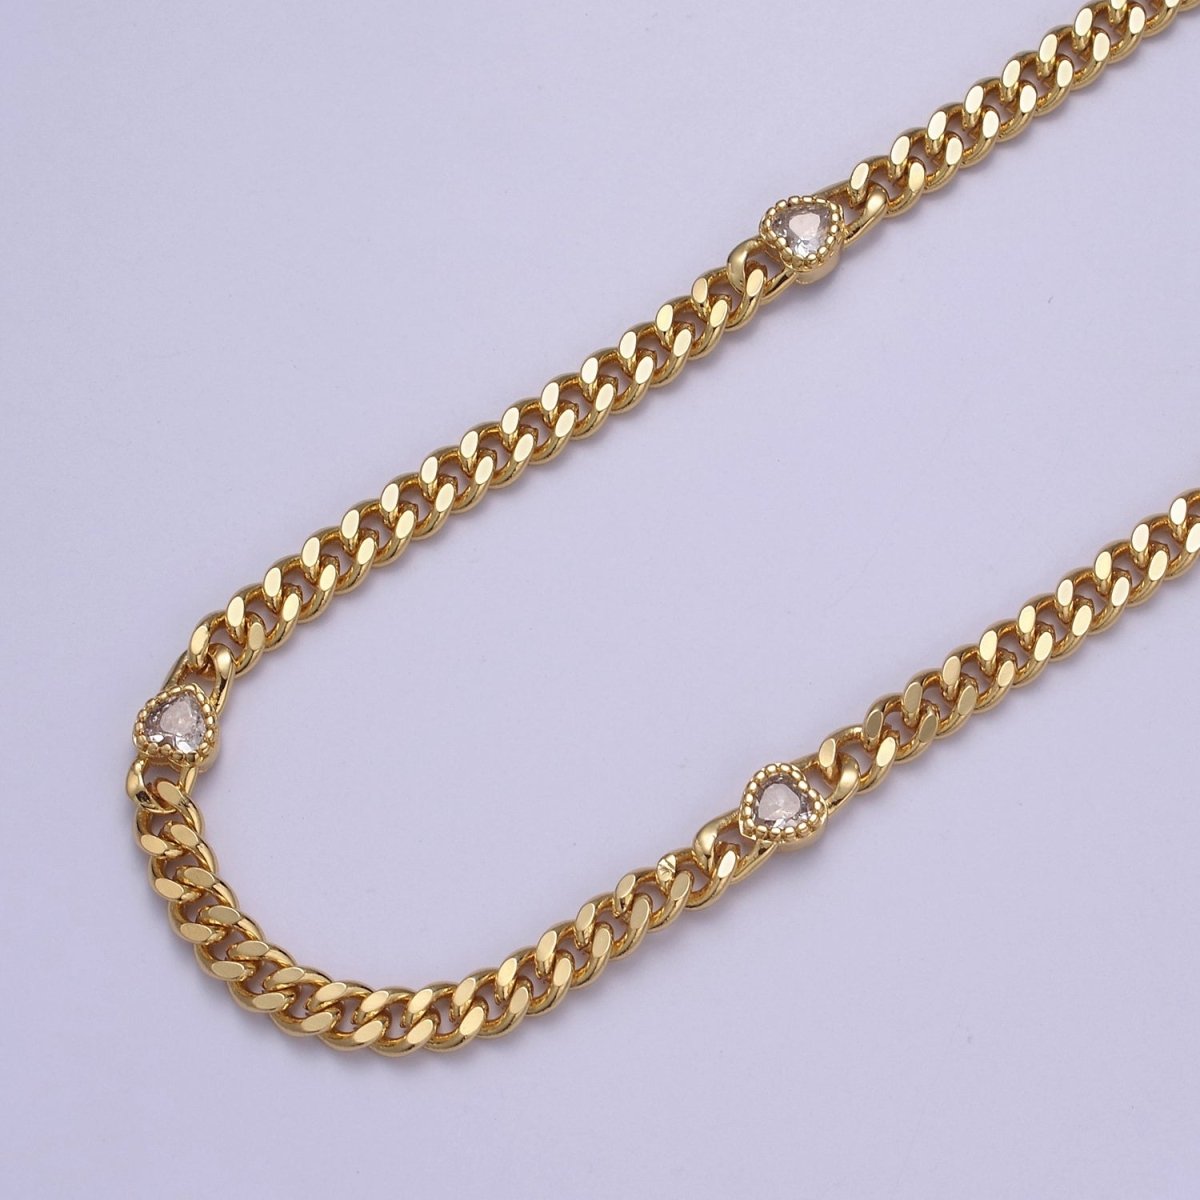 24K Gold Filled Flat Curb Chain with CZ Cubic Zirconia Heart Connector, 4.5mm Width Unfinished Chain For Jewelry Making | WA-1368-WA-1372 Clearance Pricing - DLUXCA